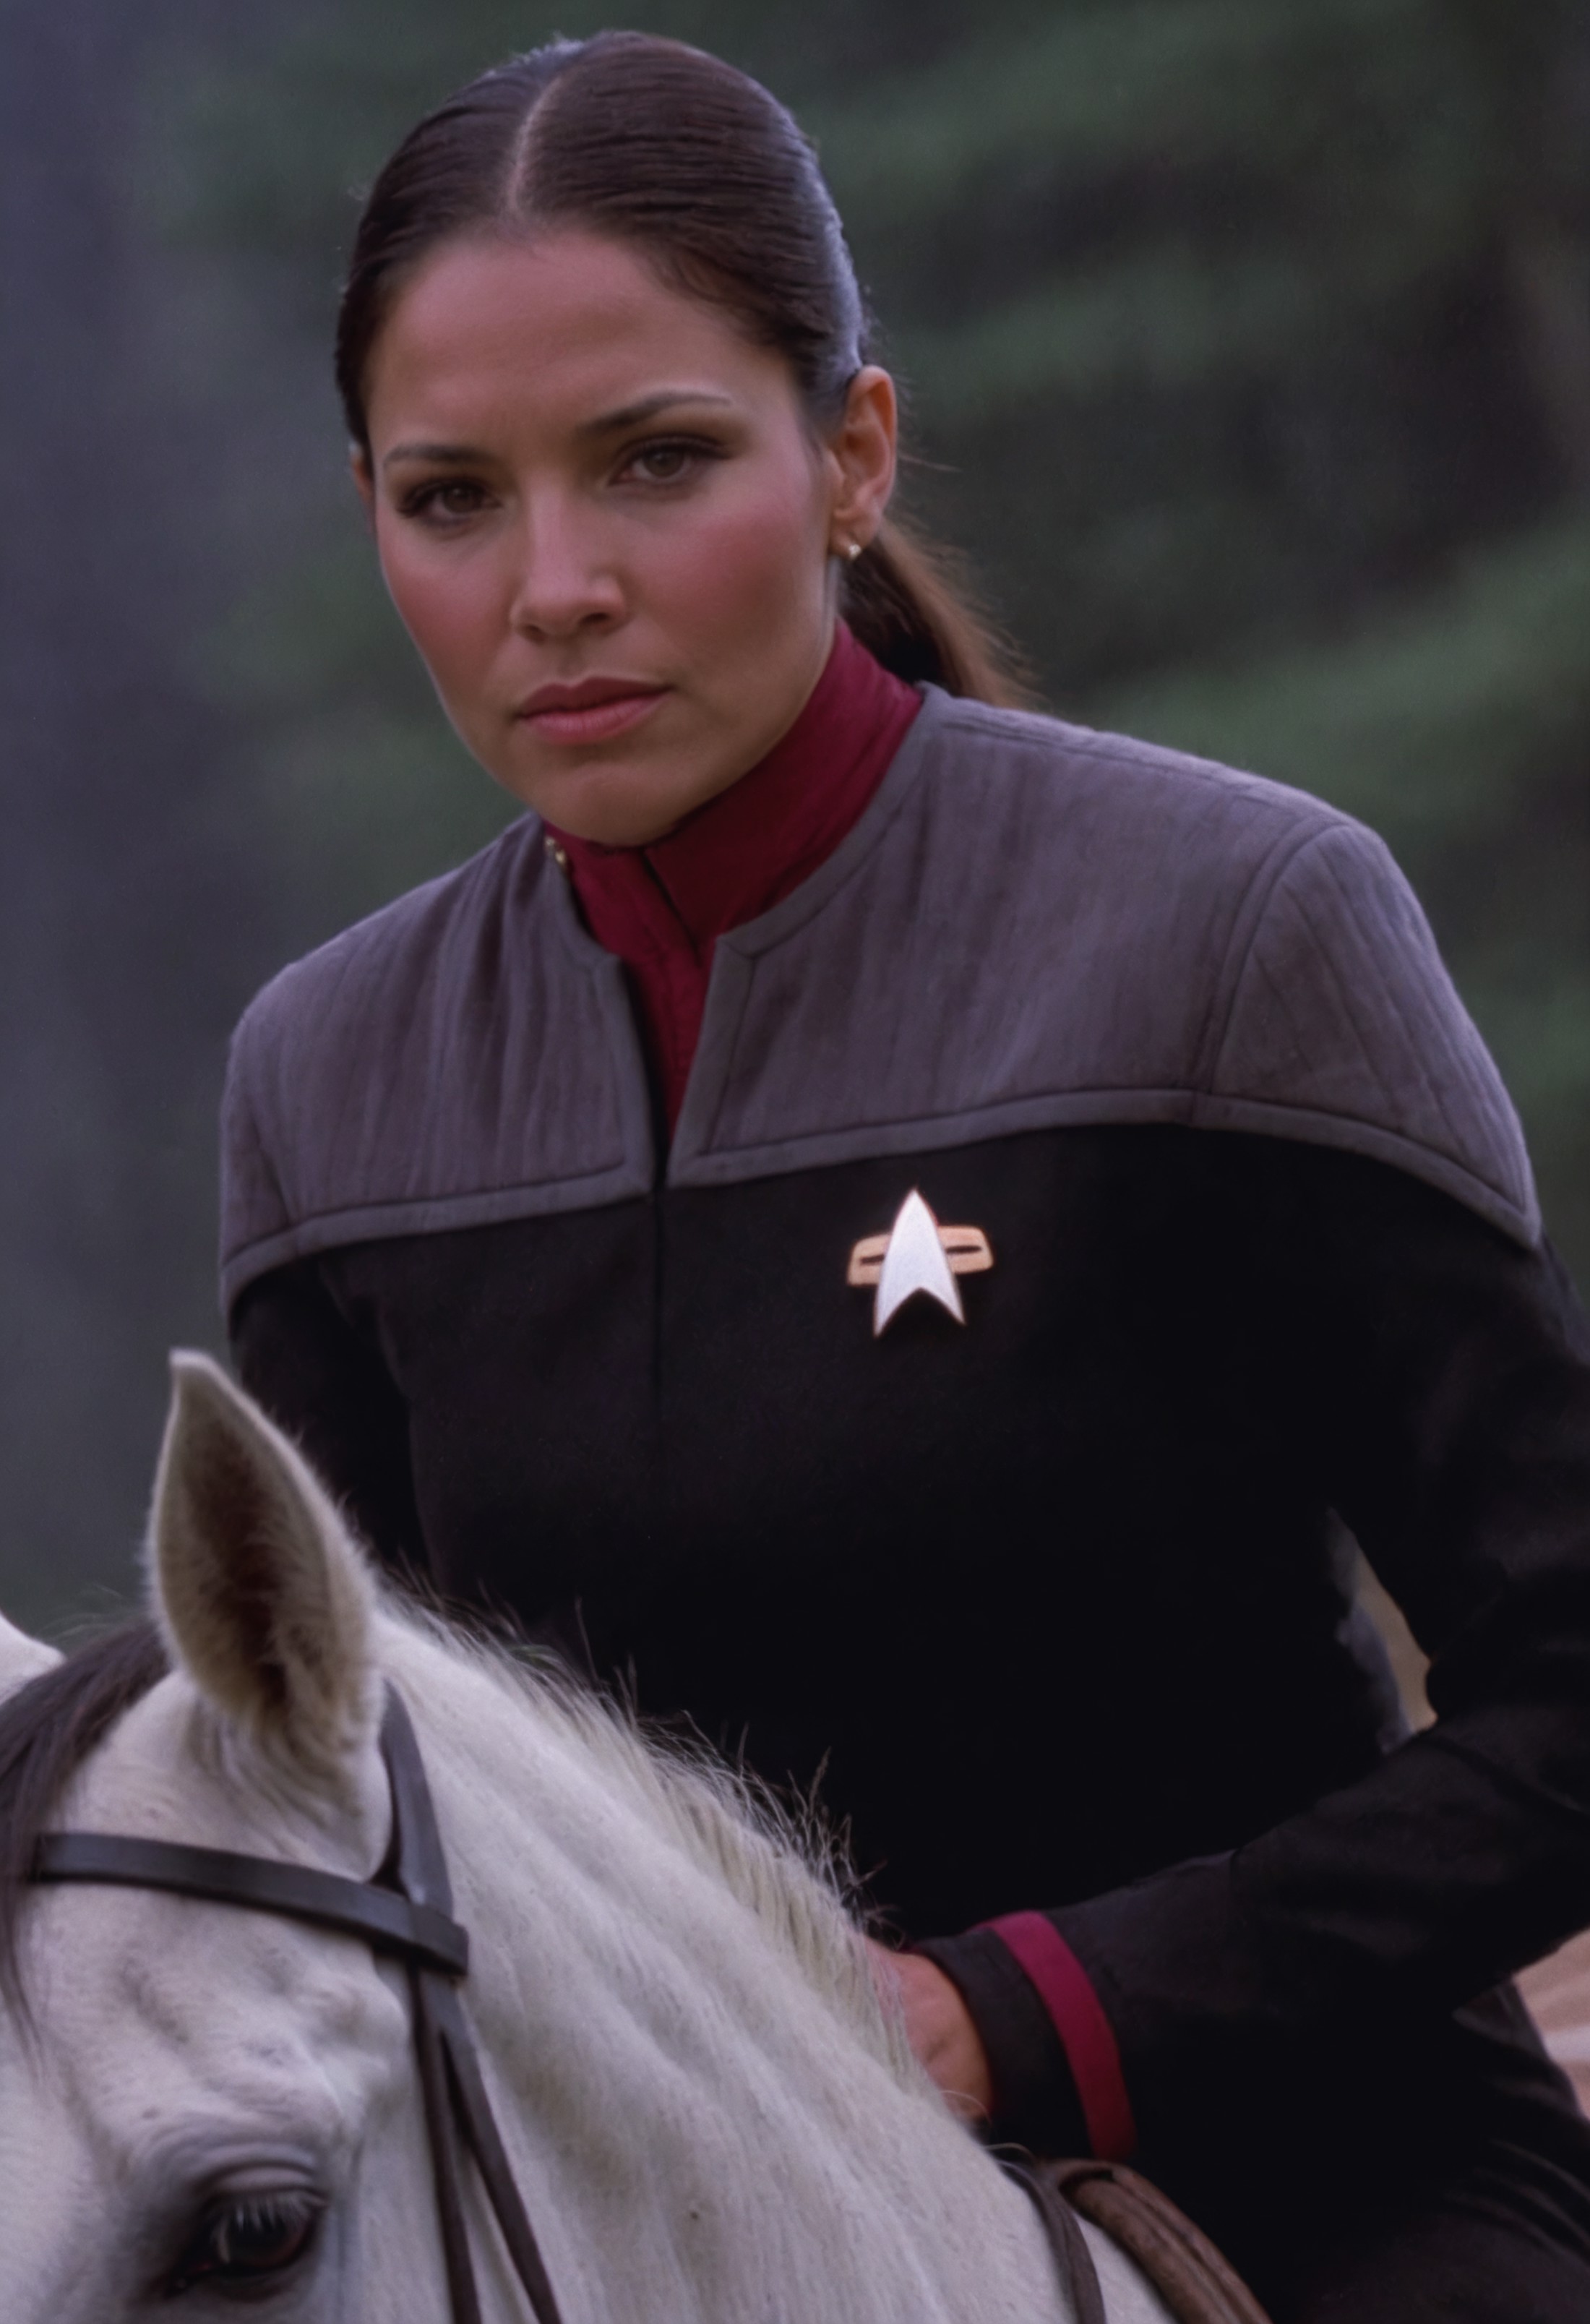 native american woman on a horse, in black and grey ds9st uniform,red collar, exquisite face, details, hands, ultimate det...